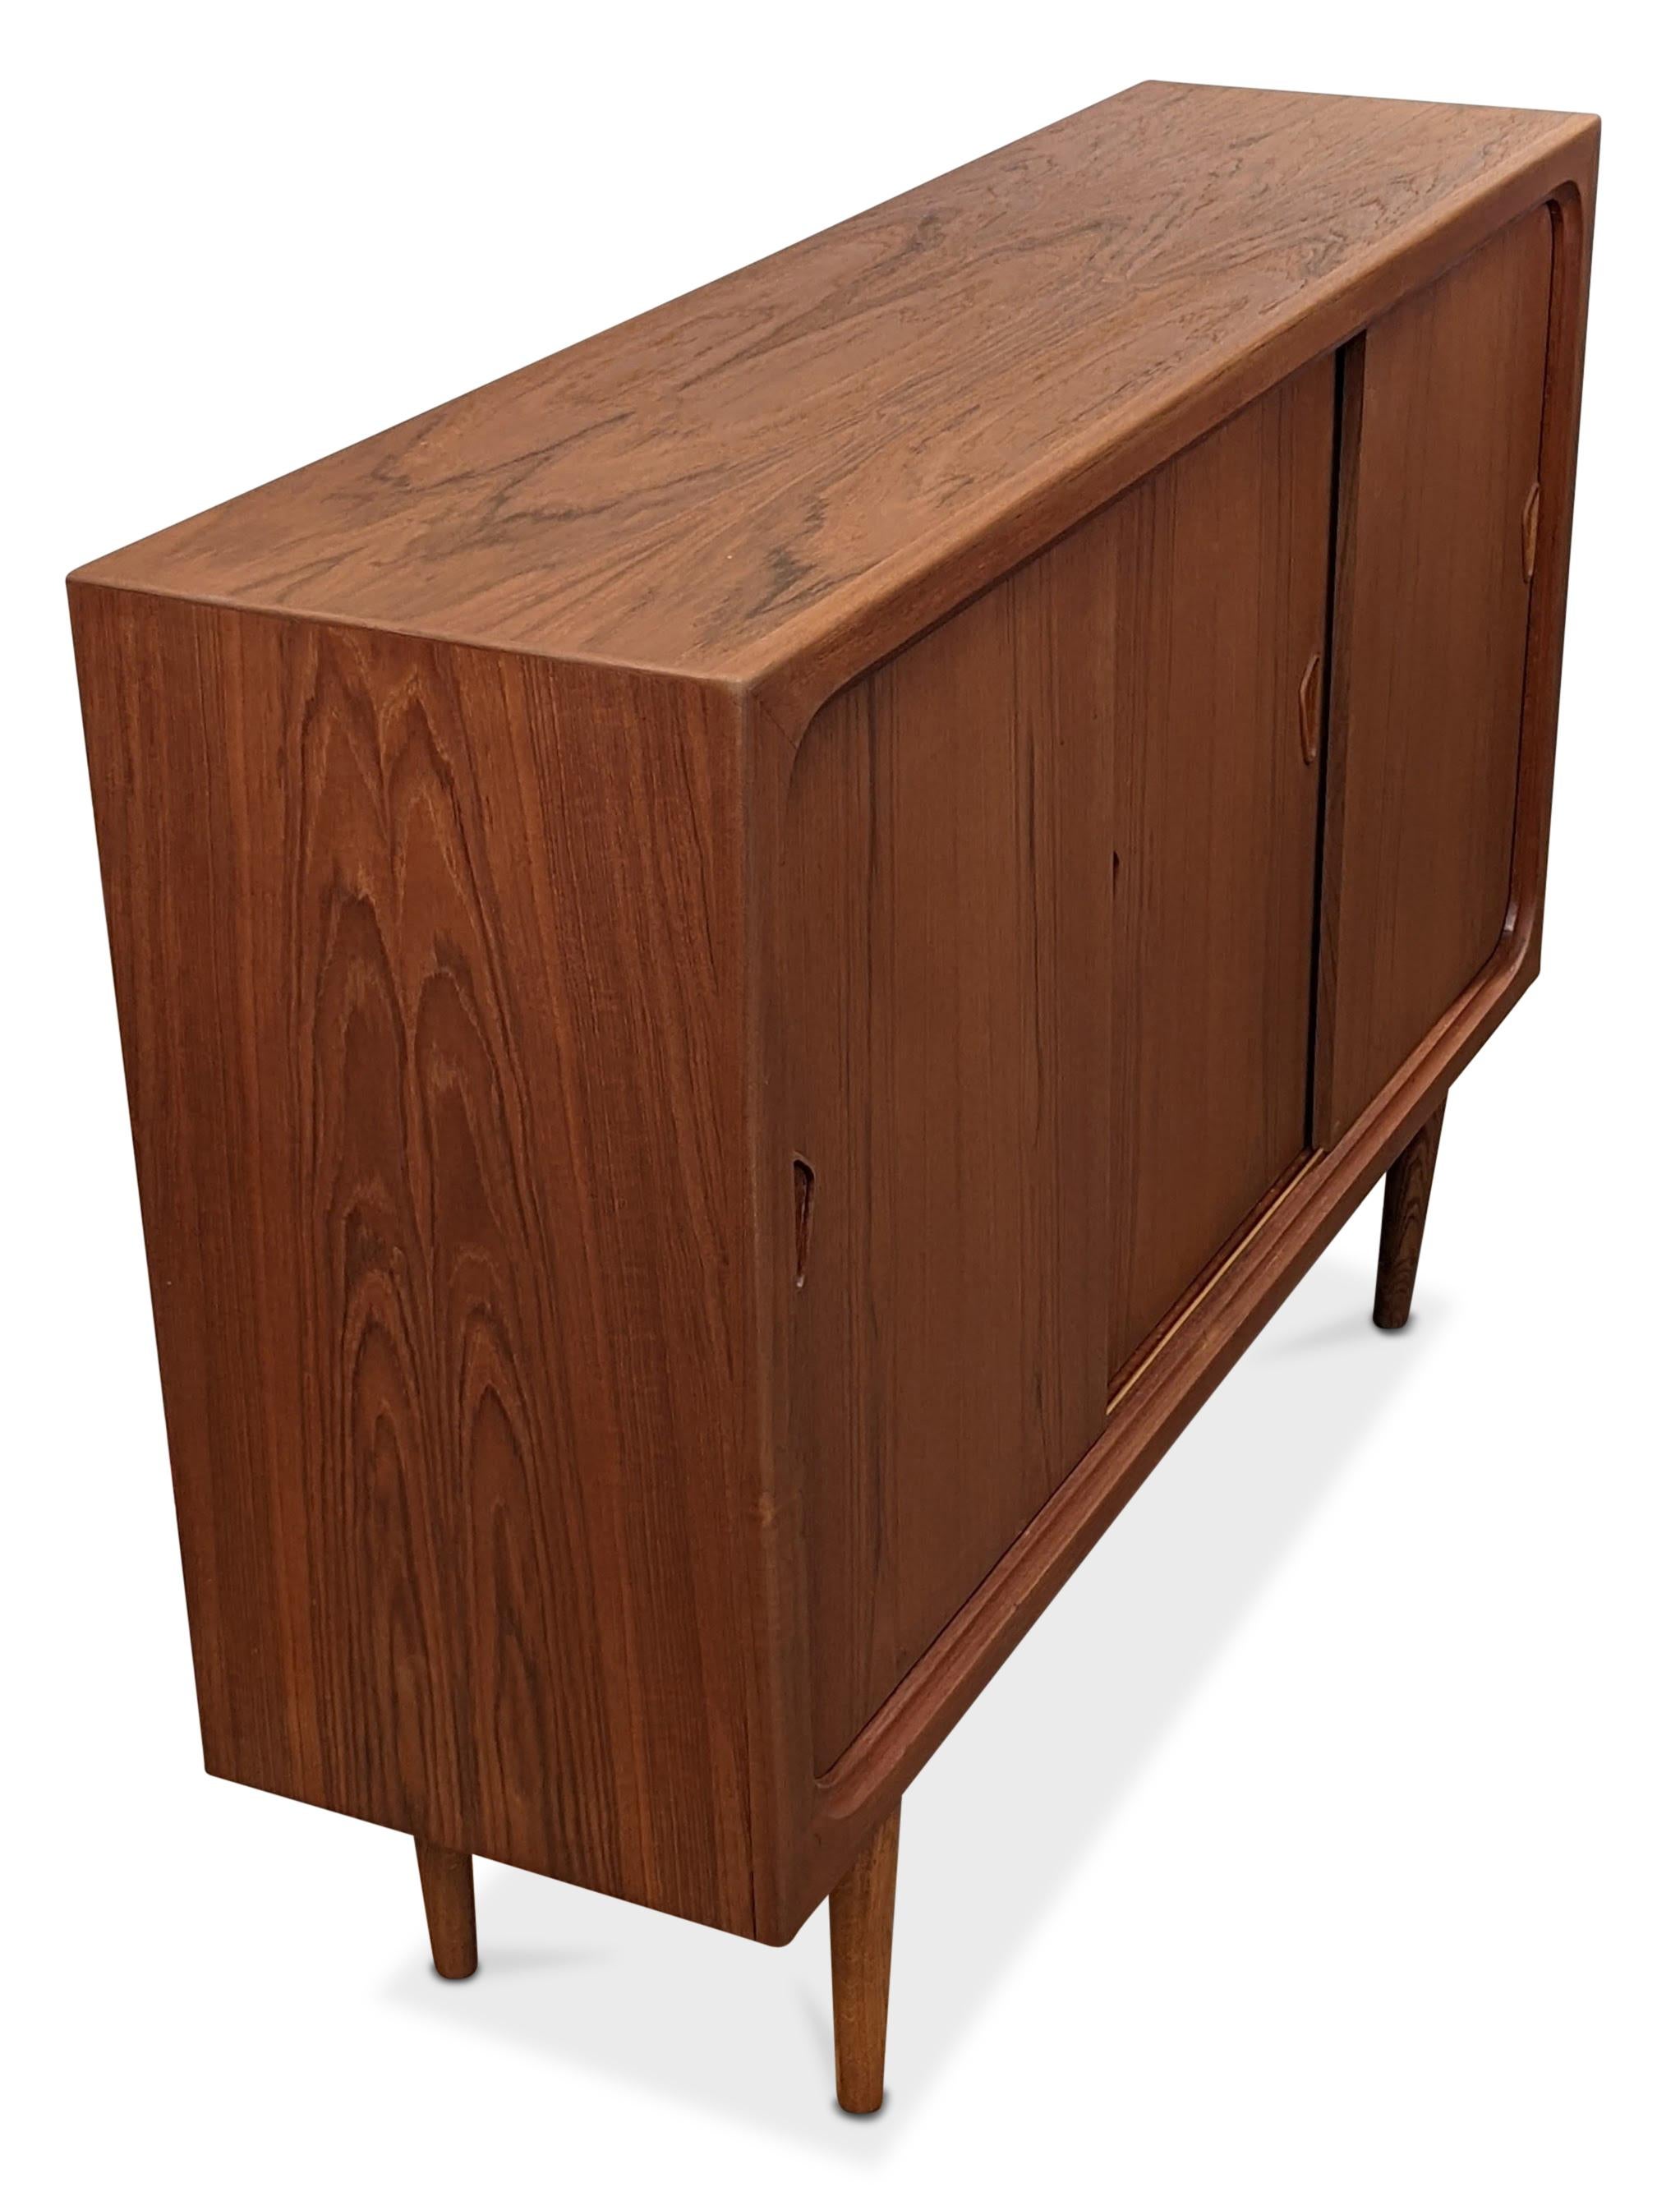 Vintage Danish Mid-Century Modern, made in the 1950's - Recently refurbished

These pieces are more than 65+ years old and some wear and tear can be expected, but we do everything we can to refurbish them in respect to the design.

There is a